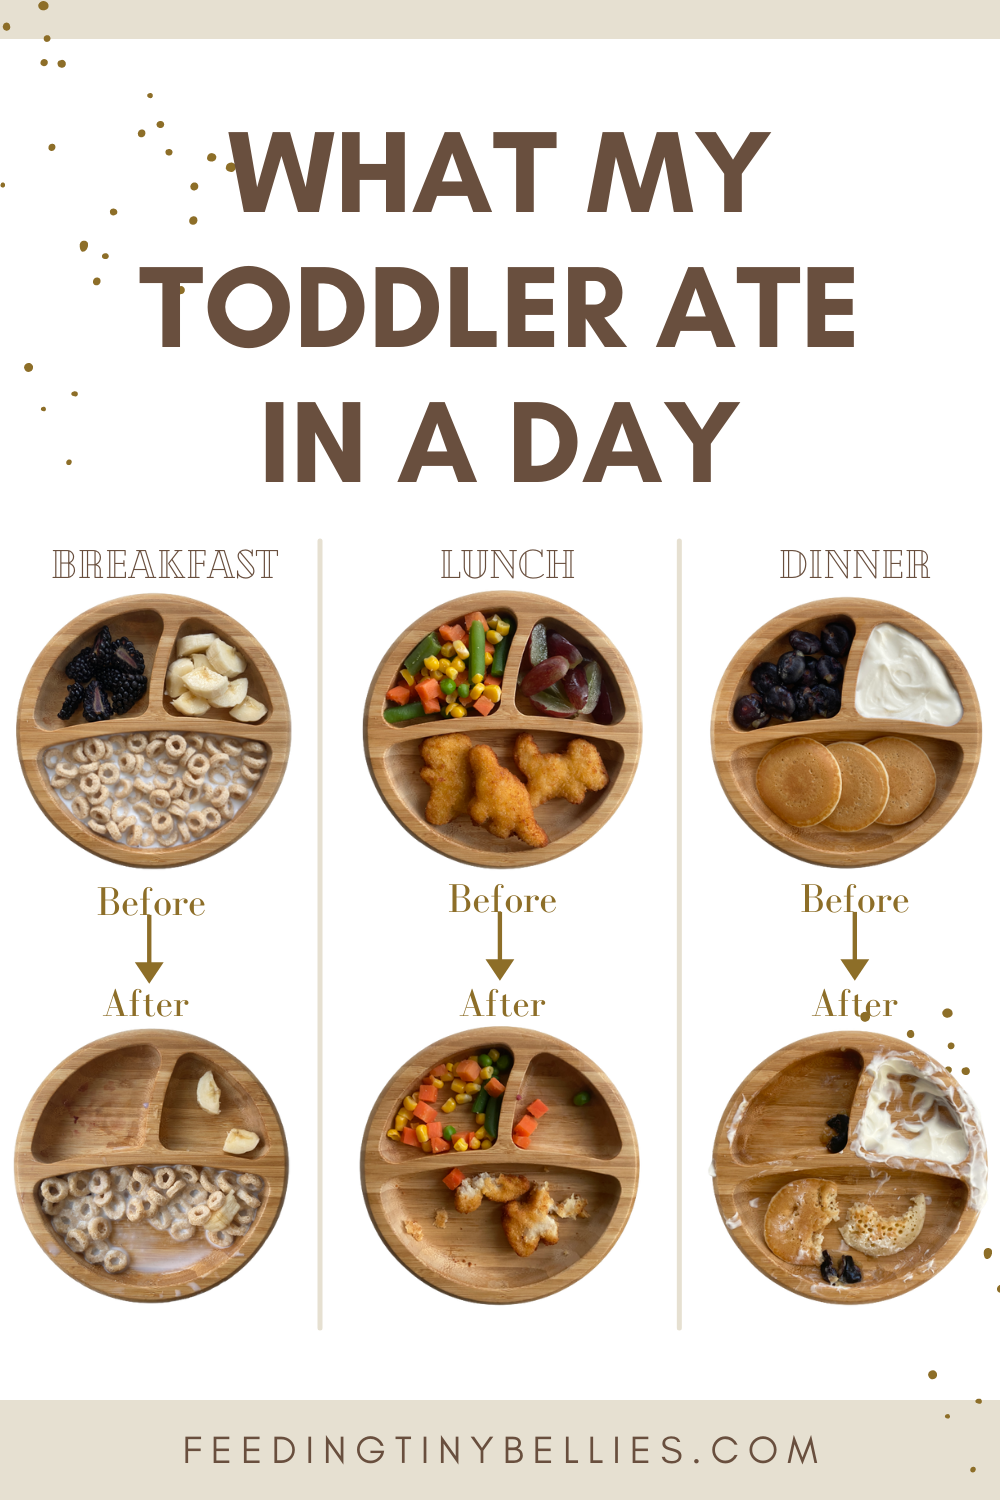 https://feedingtinybellies.com/wp-content/uploads/2022/01/What-my-toddler-ate-in-a-day.png